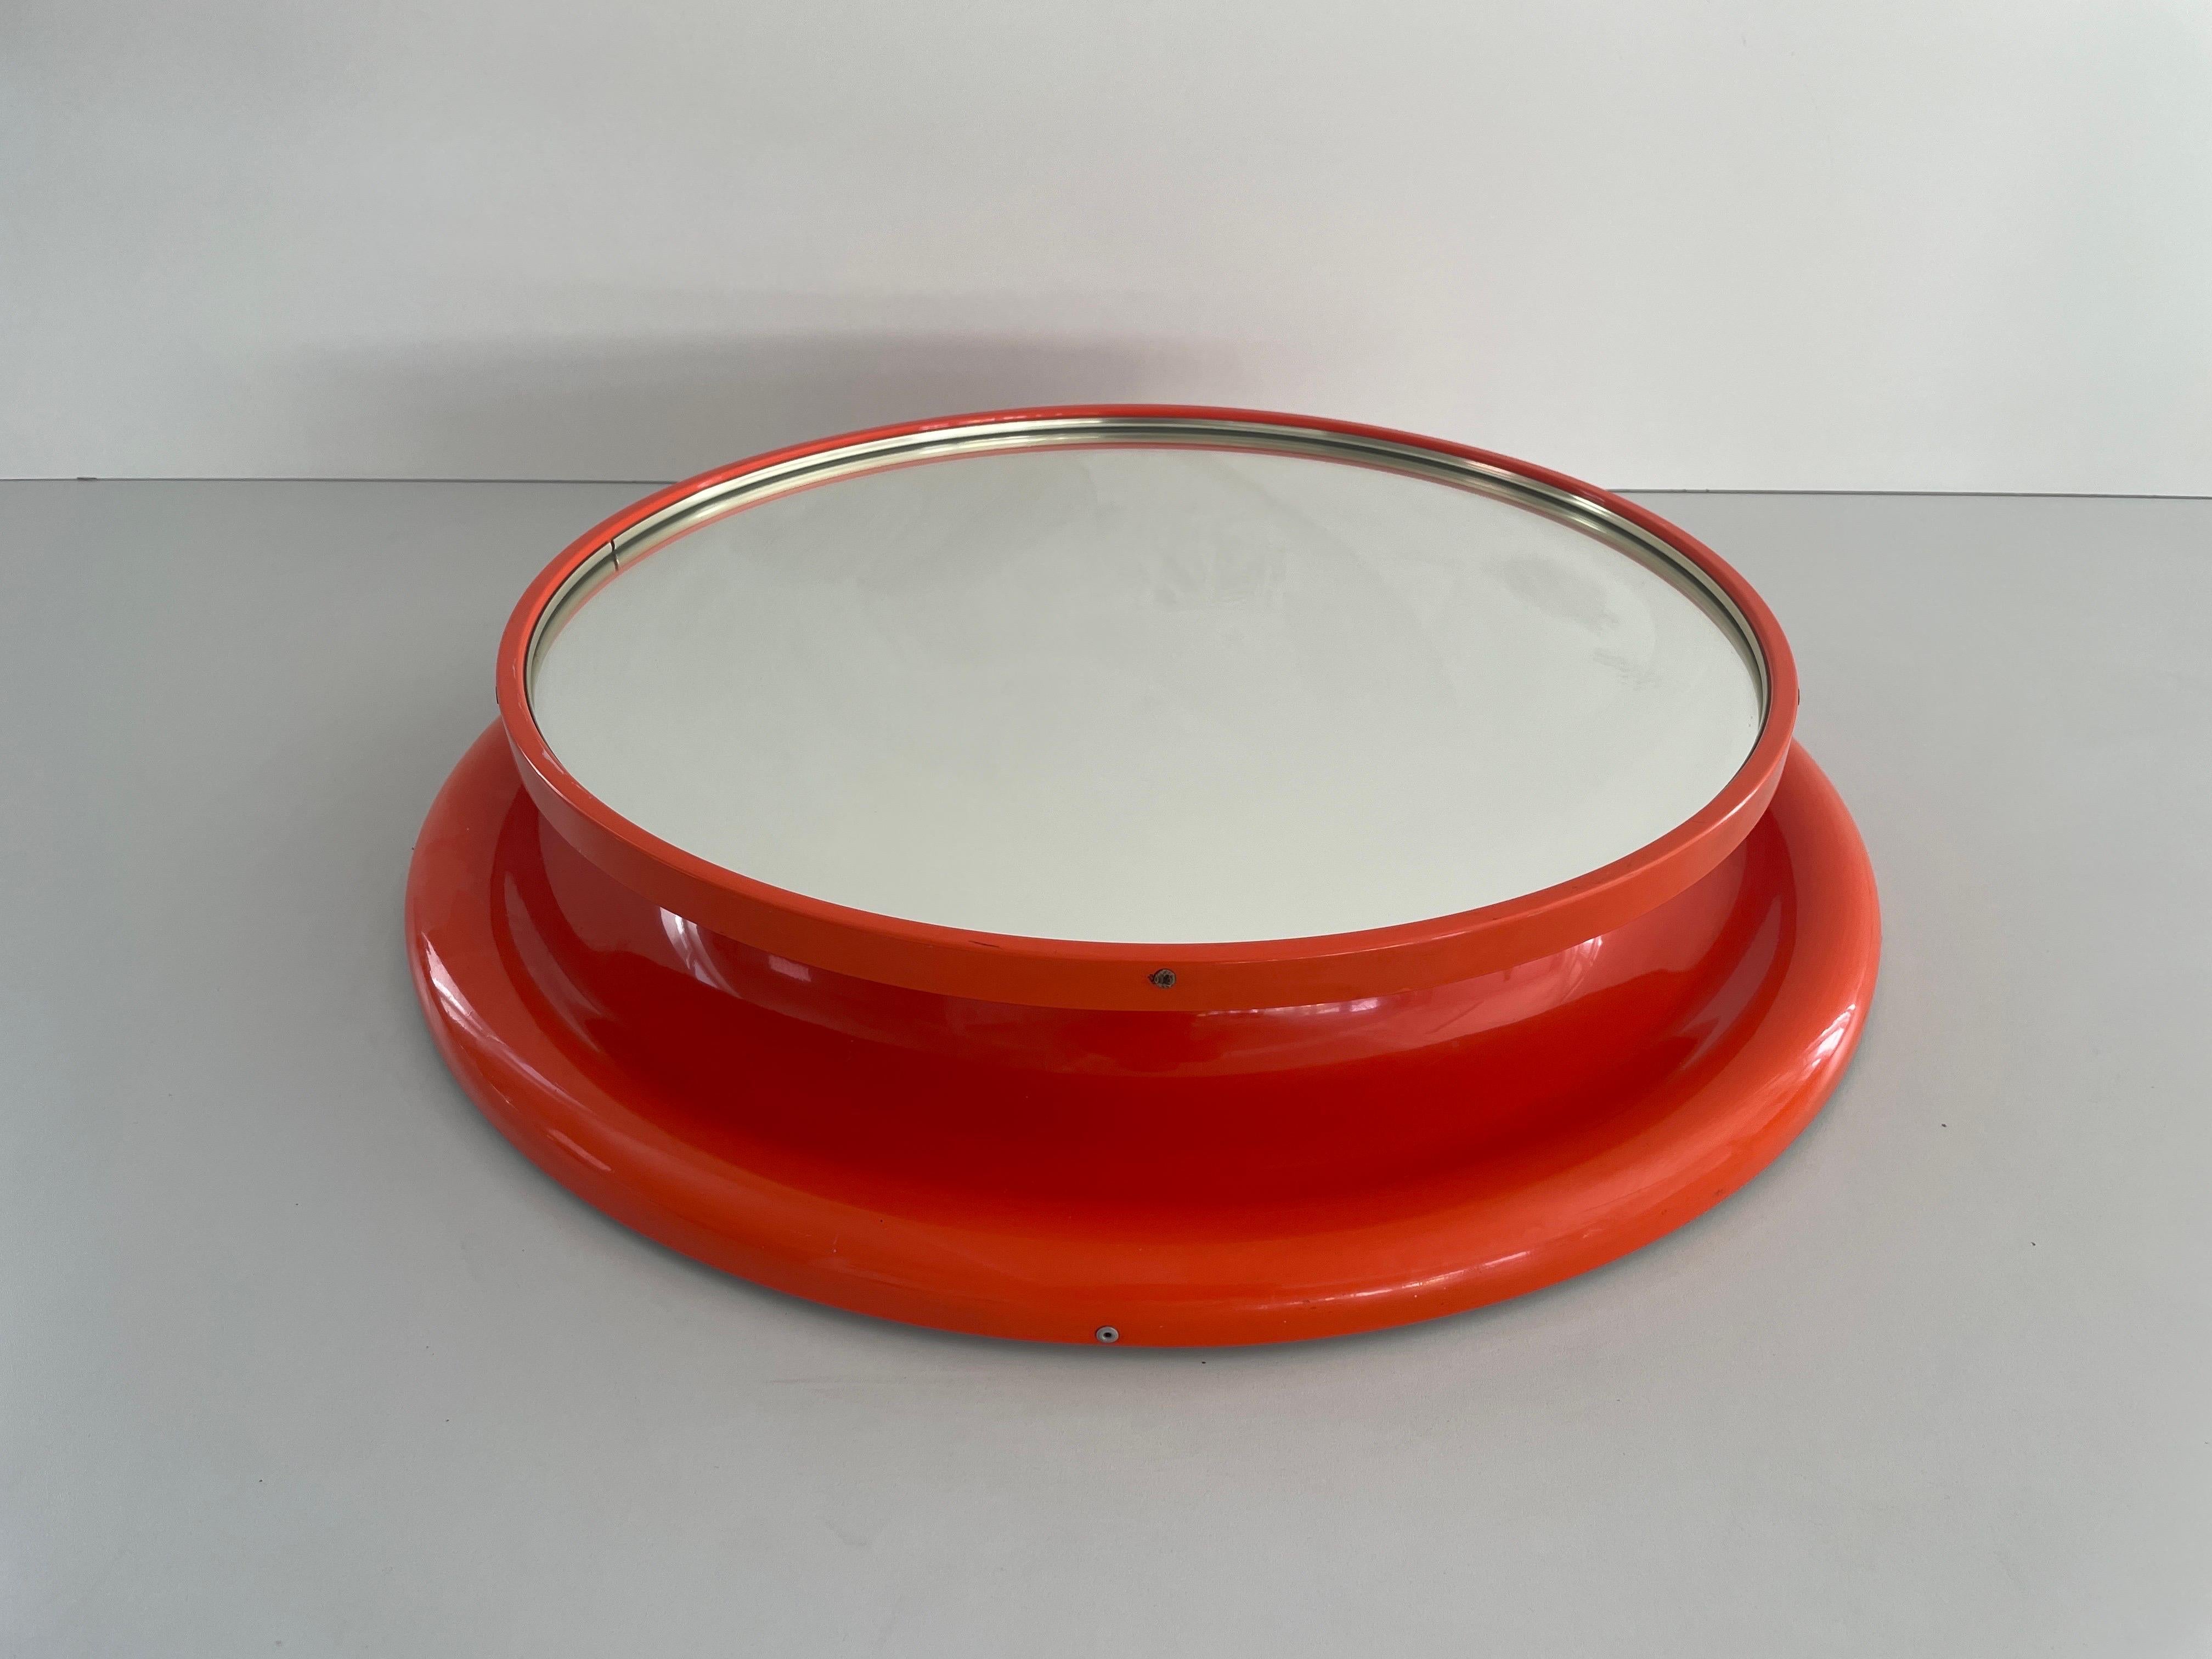 Orange Metal Pop Art Round Wall Mirror, 1970s, Italy

It is very ideal and suitable for all living areas.

No damage, no crack.
Wear consistent with age and use.

Measurements: 
Diameter: 58 cm
Mirror diameter: 46 cm
Depth: 10 cm